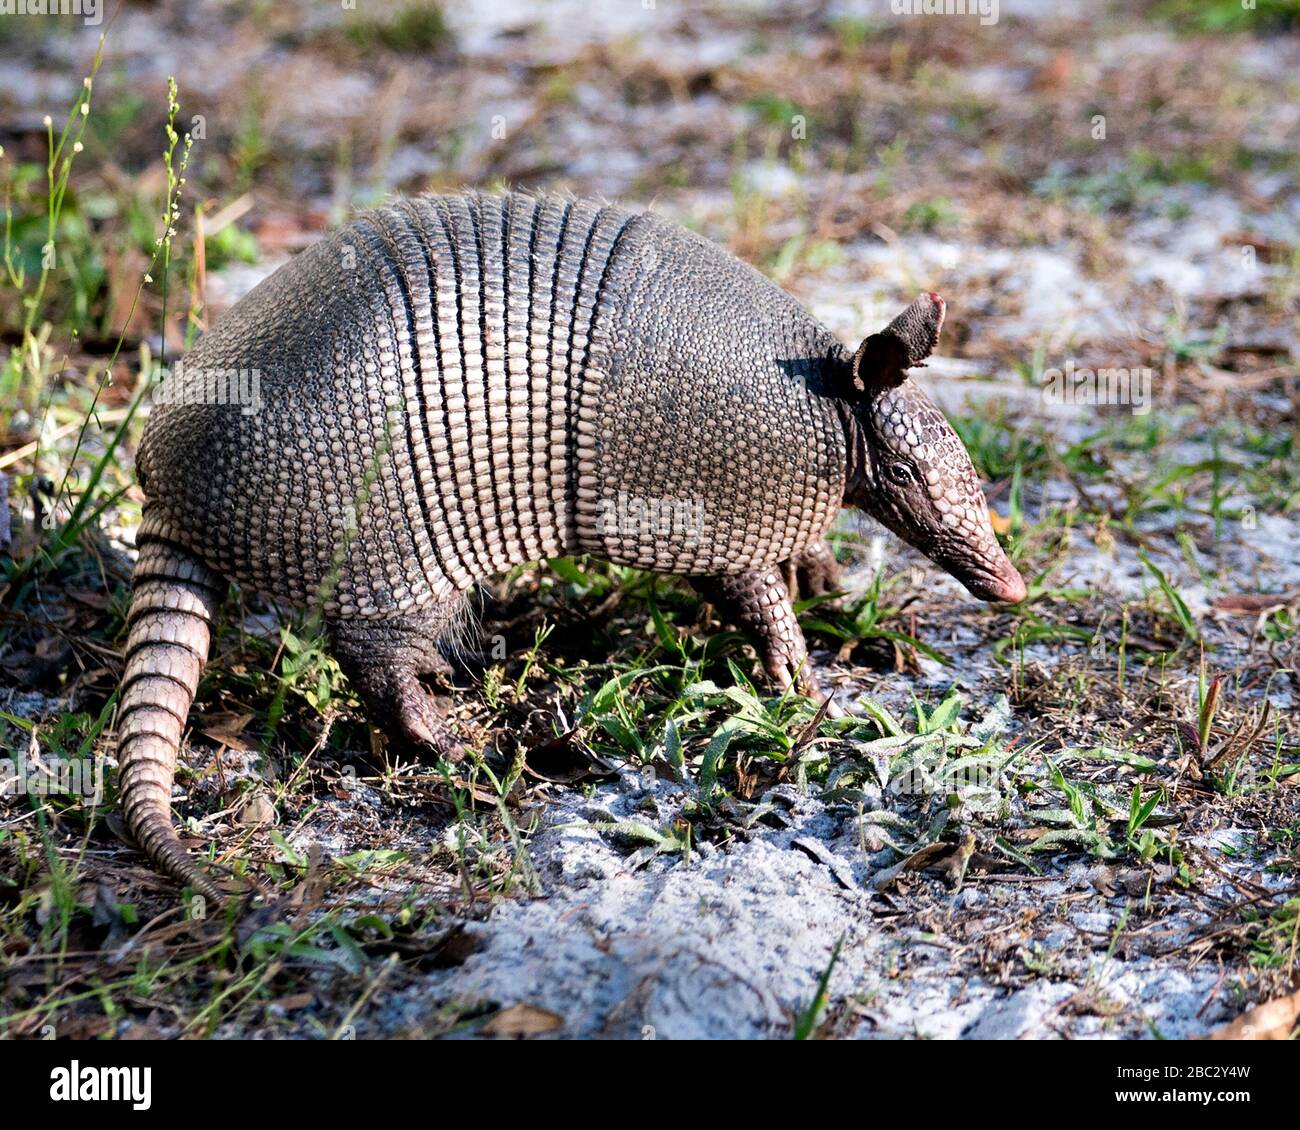 Armadillo animal close-up profile view in the field enjoying its surrounding and environment while exposing its body, head, eyes, ears, tail Stock Photo